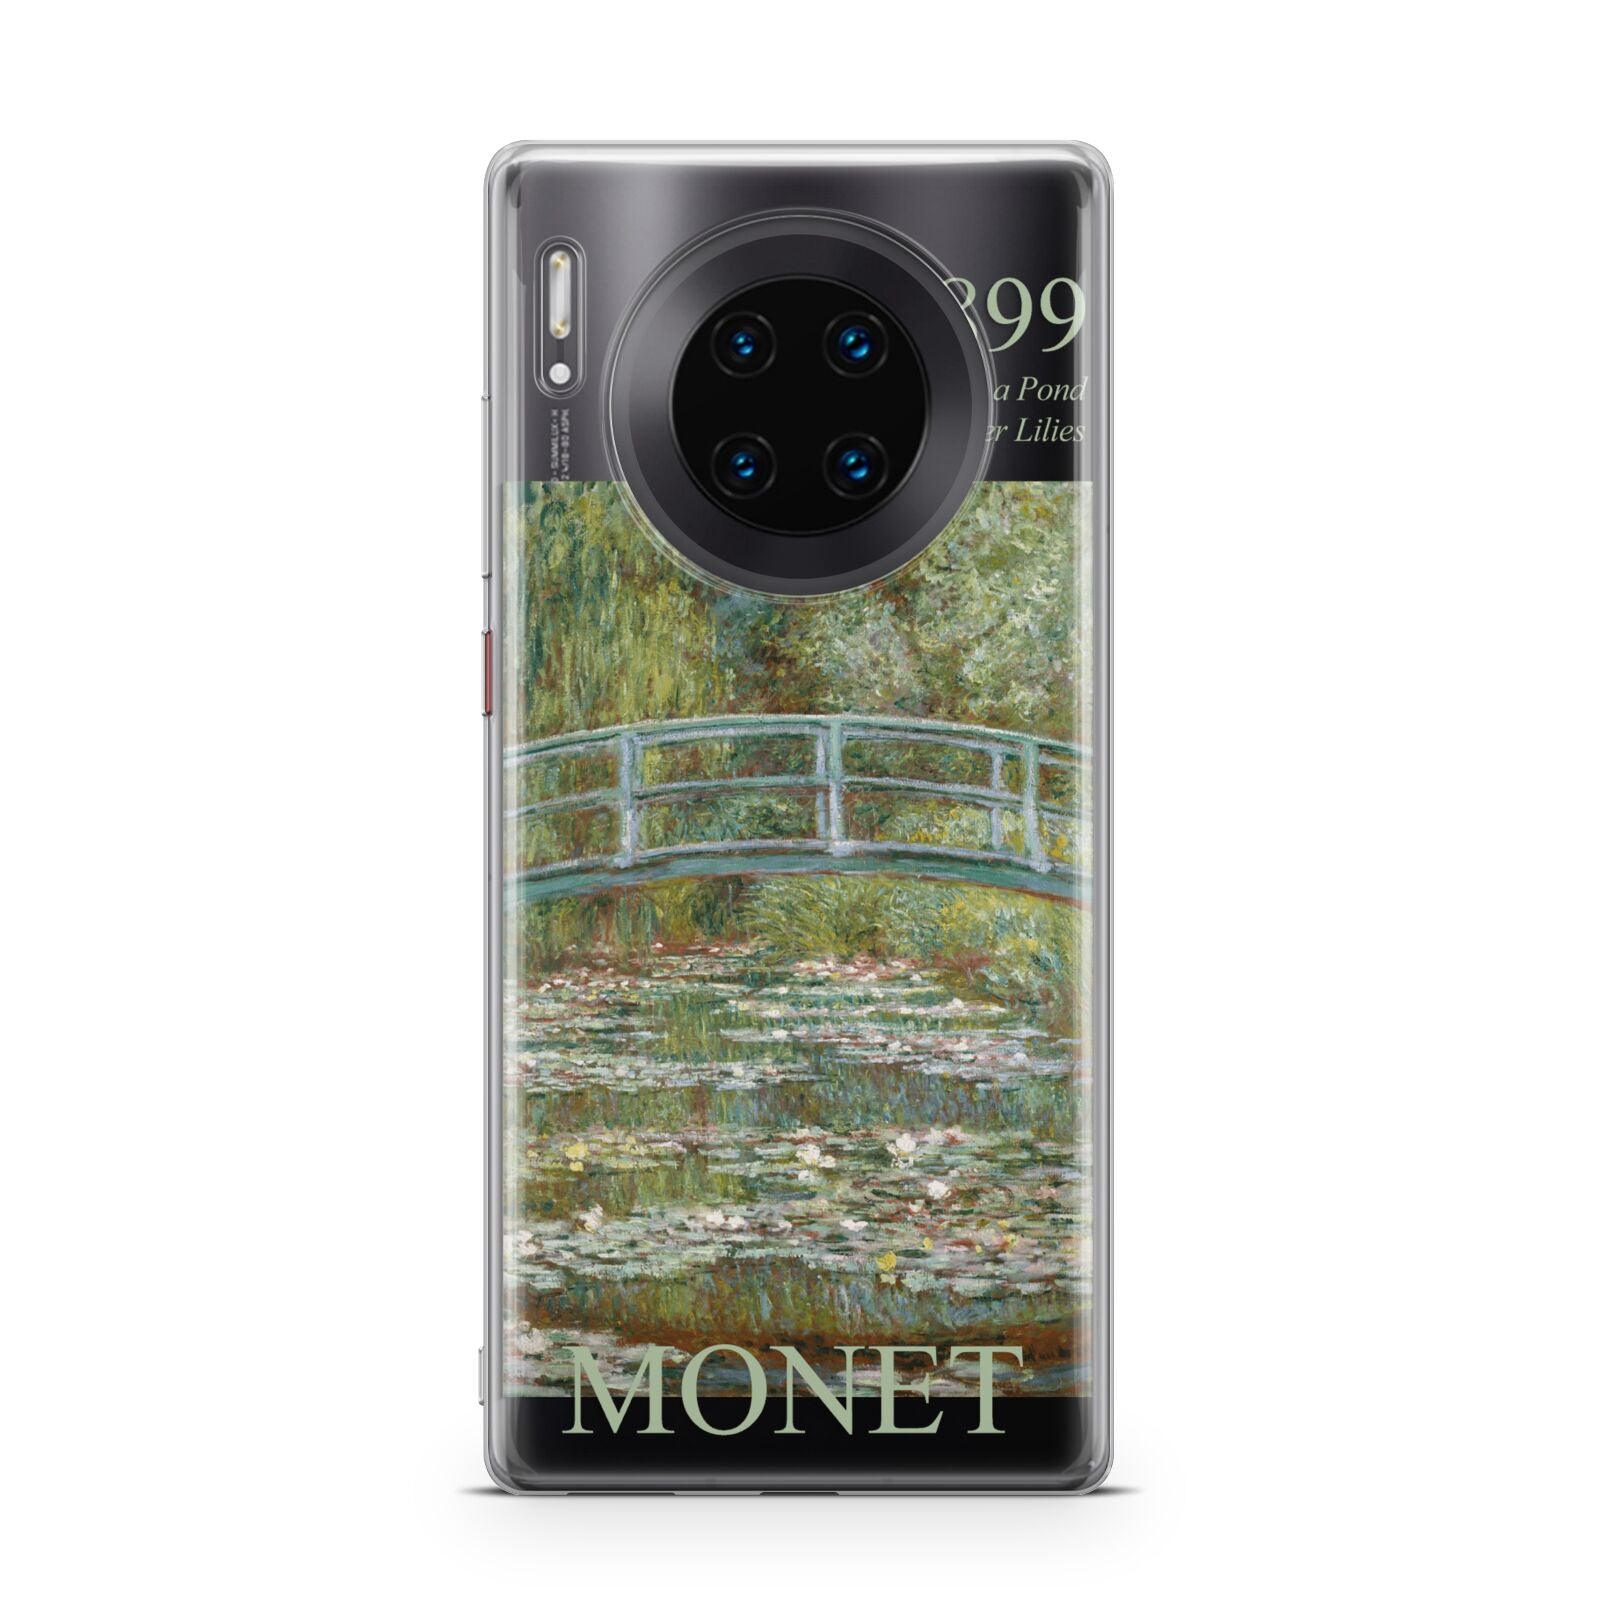 Bridge Over A Pond Of Water Lilies By Monet Huawei Mate 30 Pro Phone Case